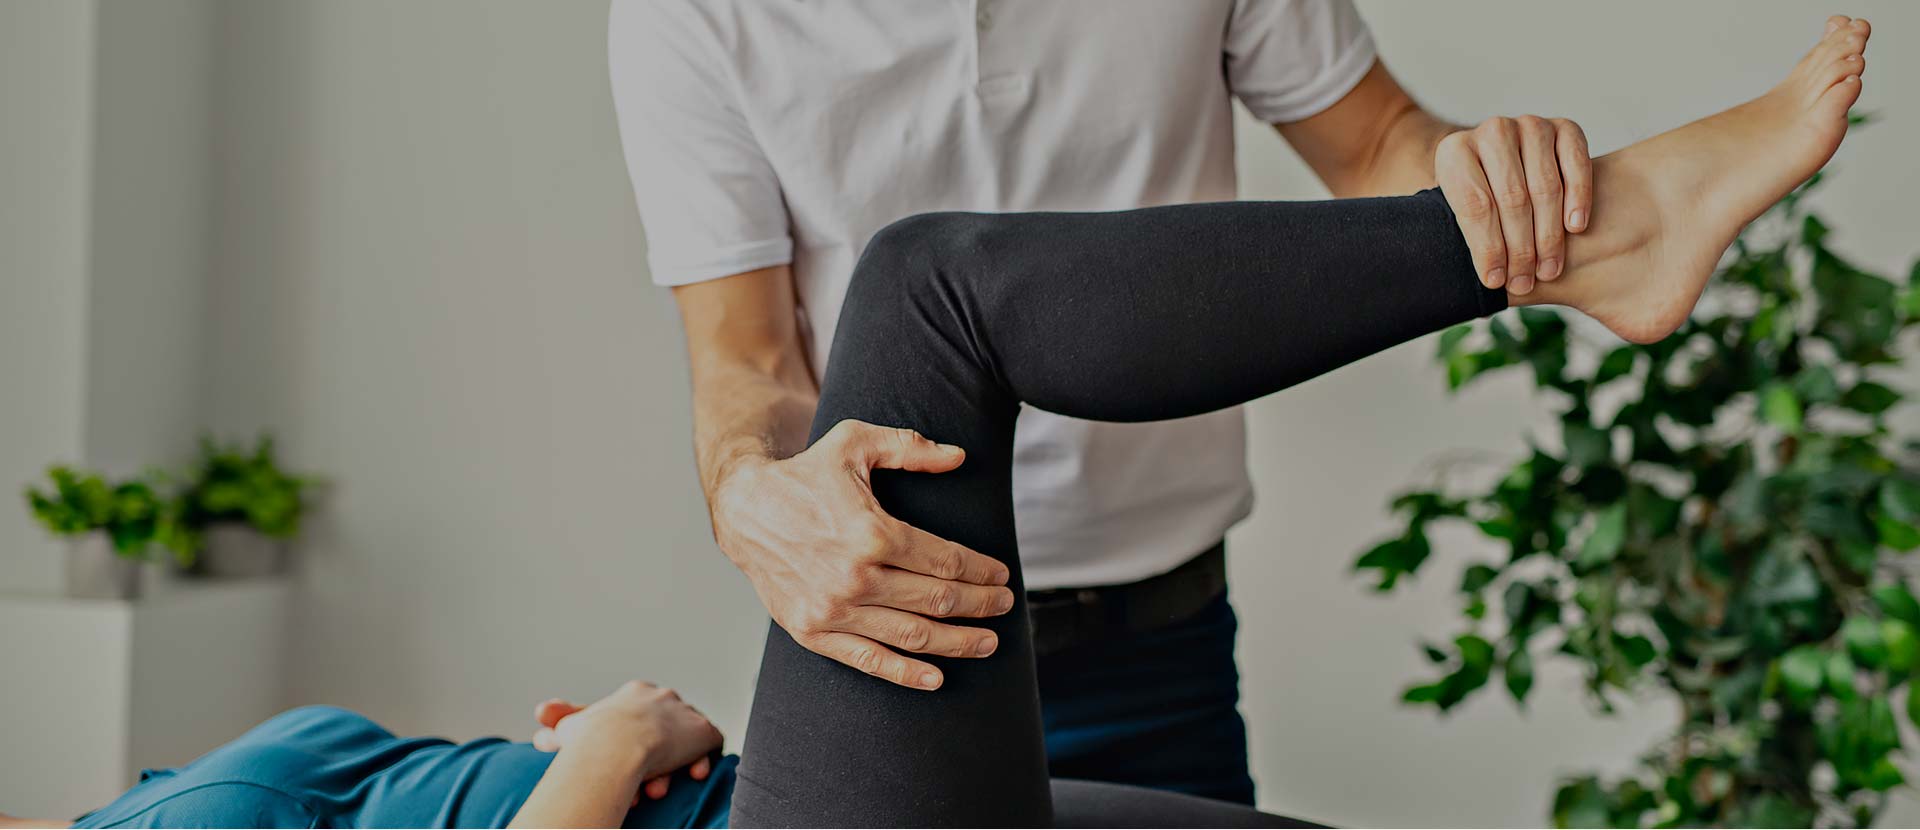 Physical therapy for leg knee and hip in the Indianapolis area from Milestone Physical Therapy & Training | Indianapolis Physical Therapists